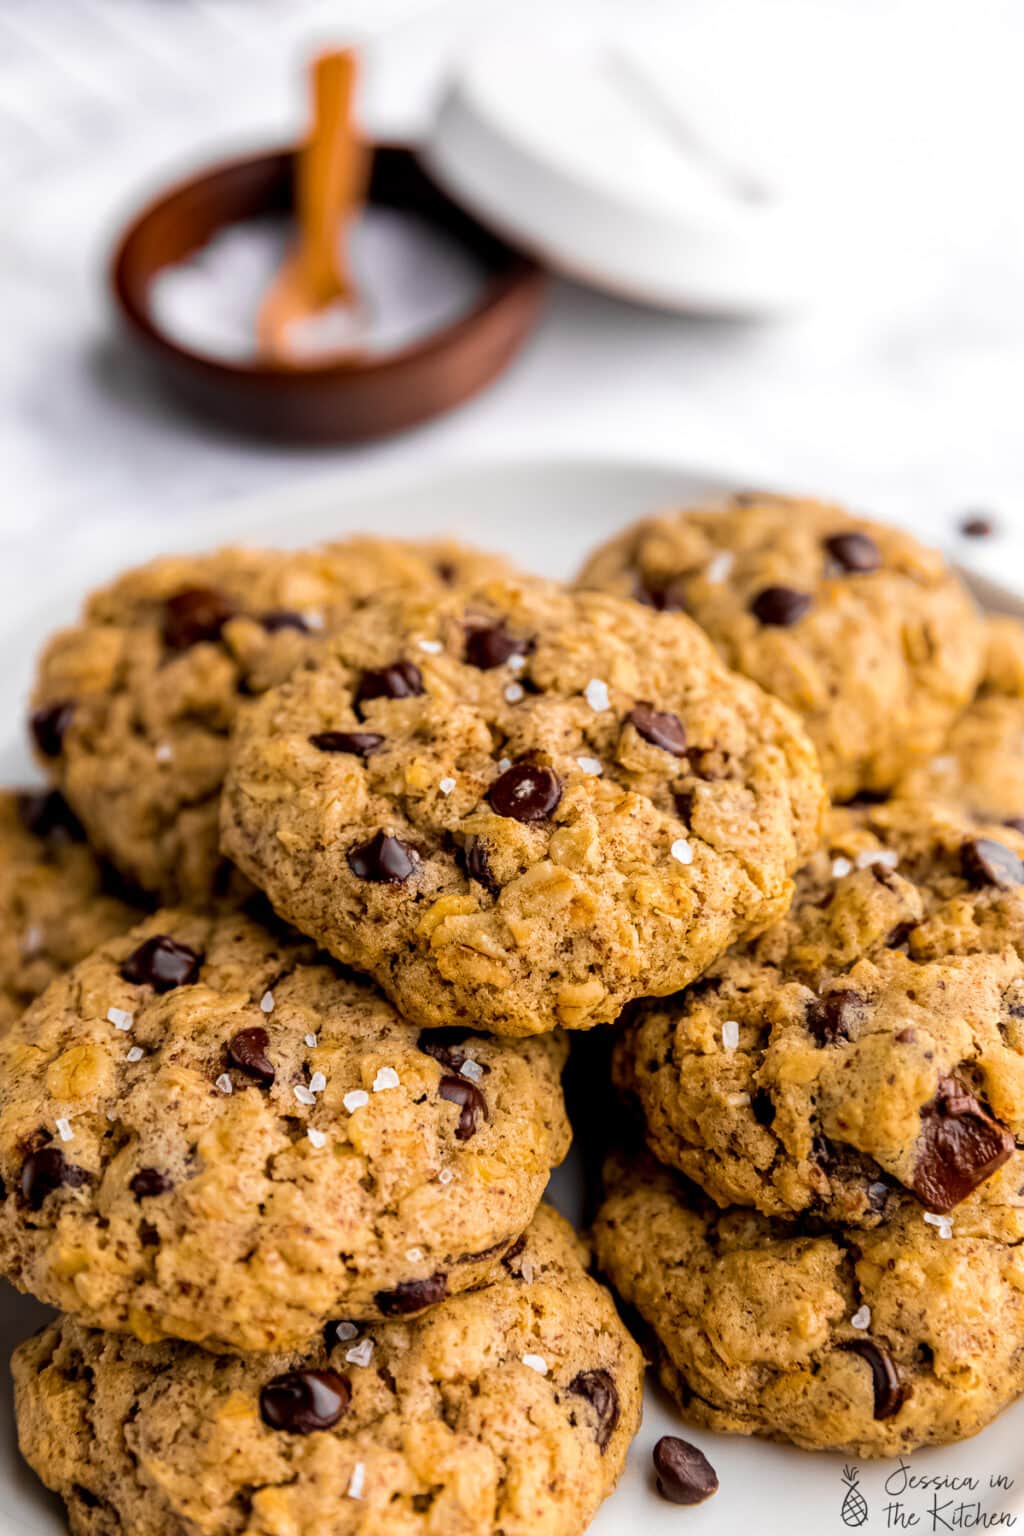 Oatmeal Chocolate Chip Cookies (Vegan) - Jessica in the Kitchen